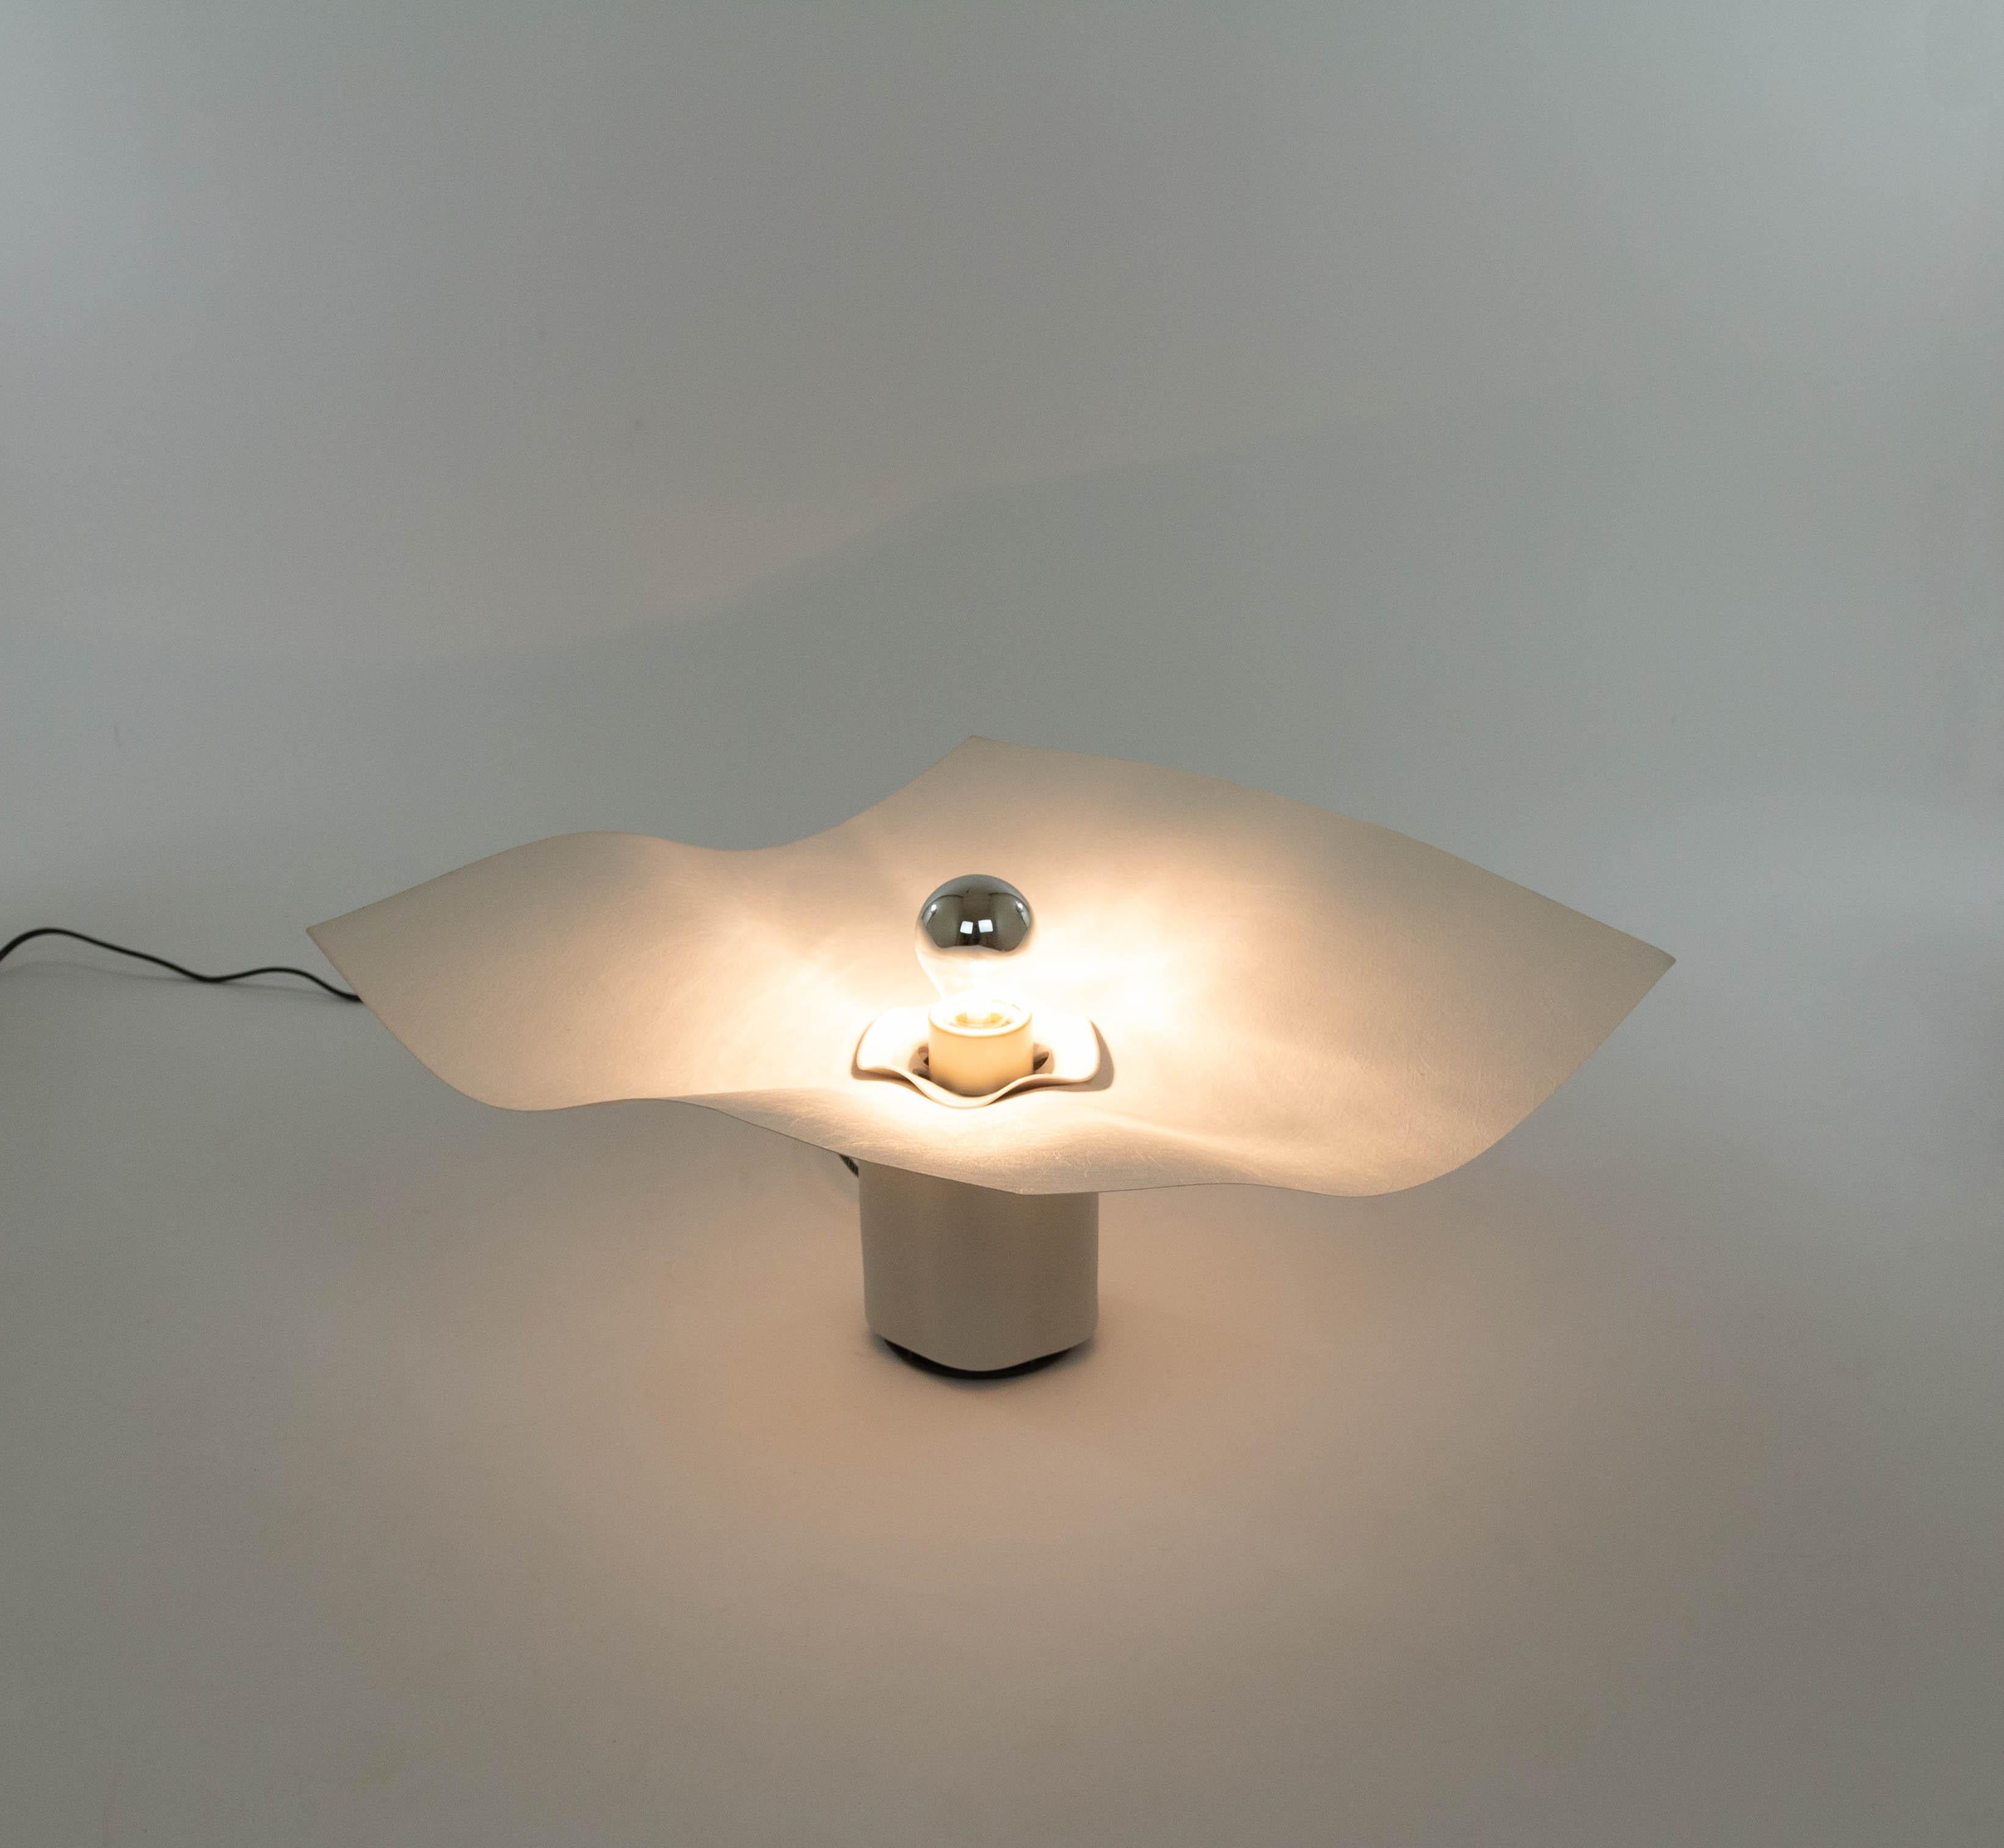 Area 50 table lamp, designed by Mario Bellini and manufactured by Artemide in the 1970s.

The lamp consists of a white matt porcelain base (18 cm / 7 inch high) and a cream coloured diffuser in synthetic textile. A plastic part together with the